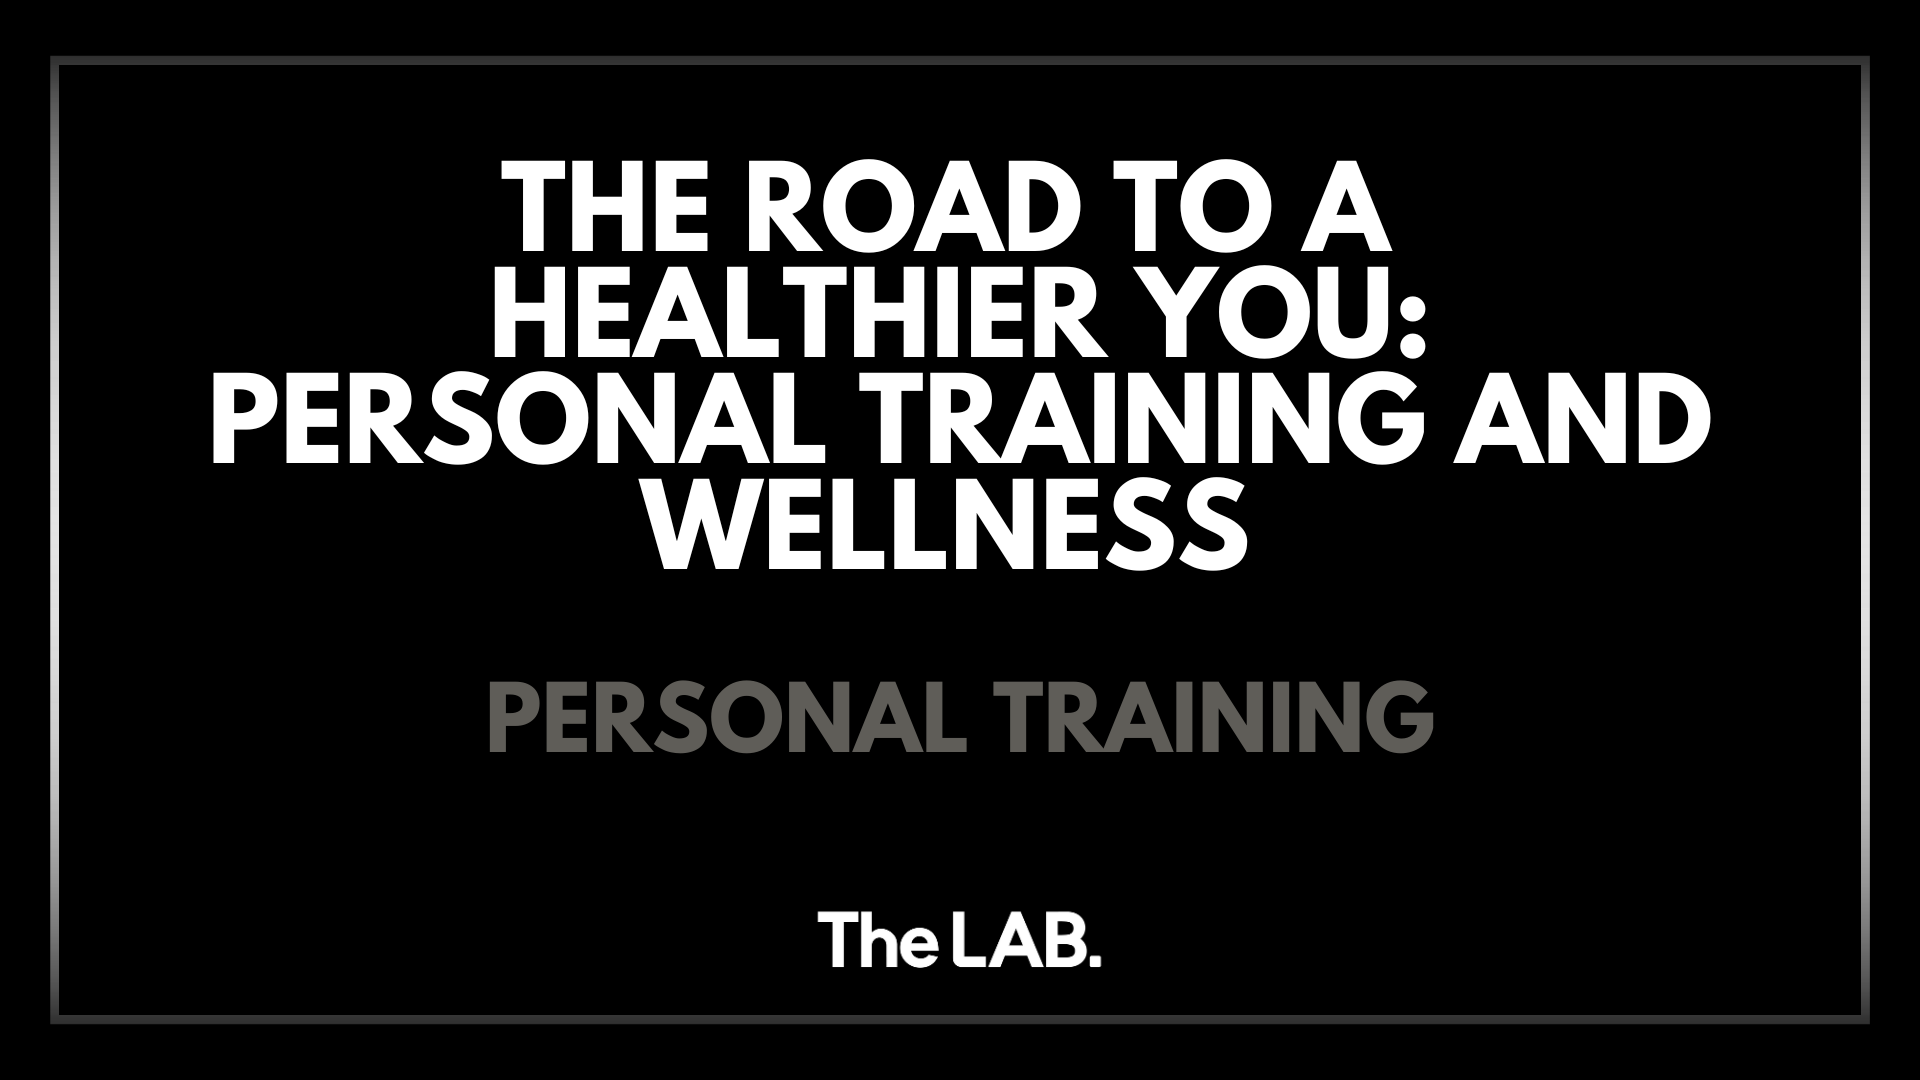 The Road to a Healthier You: Personal Training and Wellness